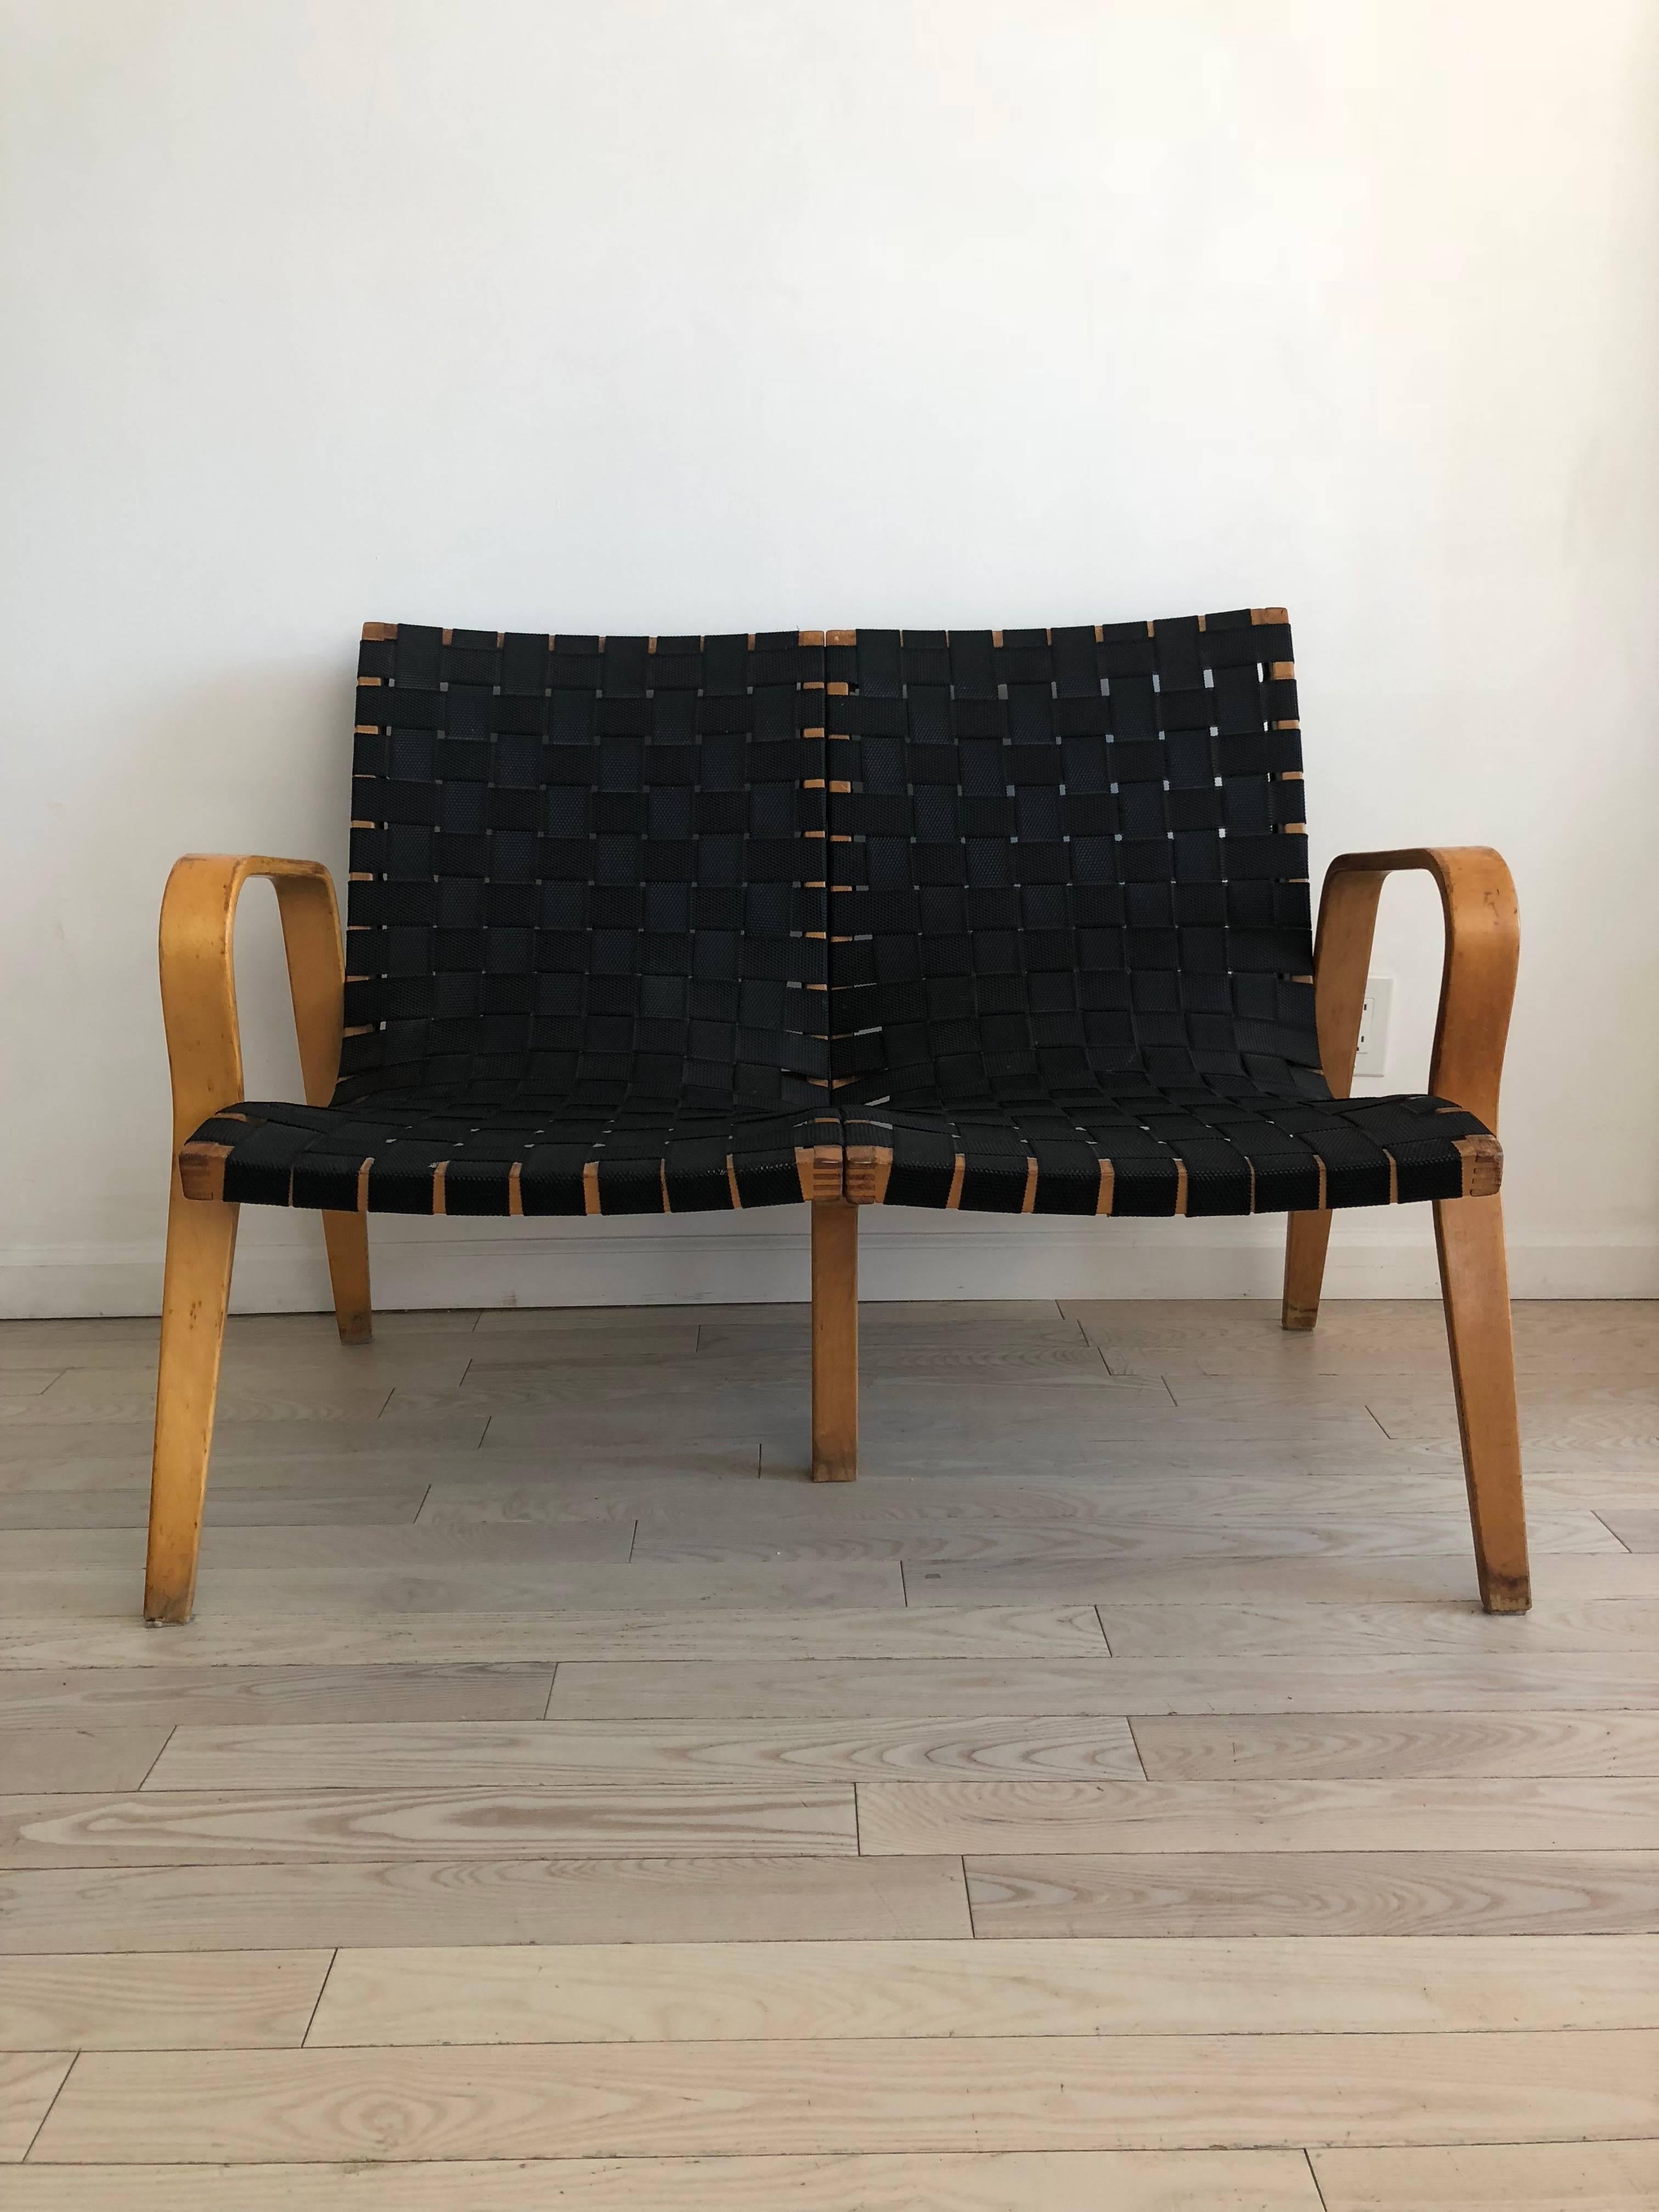 Midcentury Bruno Mathsson style bent birch with black webbing settle. Seats two persons. Pretty bentwood arms with tapered legs. Lounge loveseat! Some mild scuffs, stains and nicks on wood from age and use. Measure: Seat height 16.5